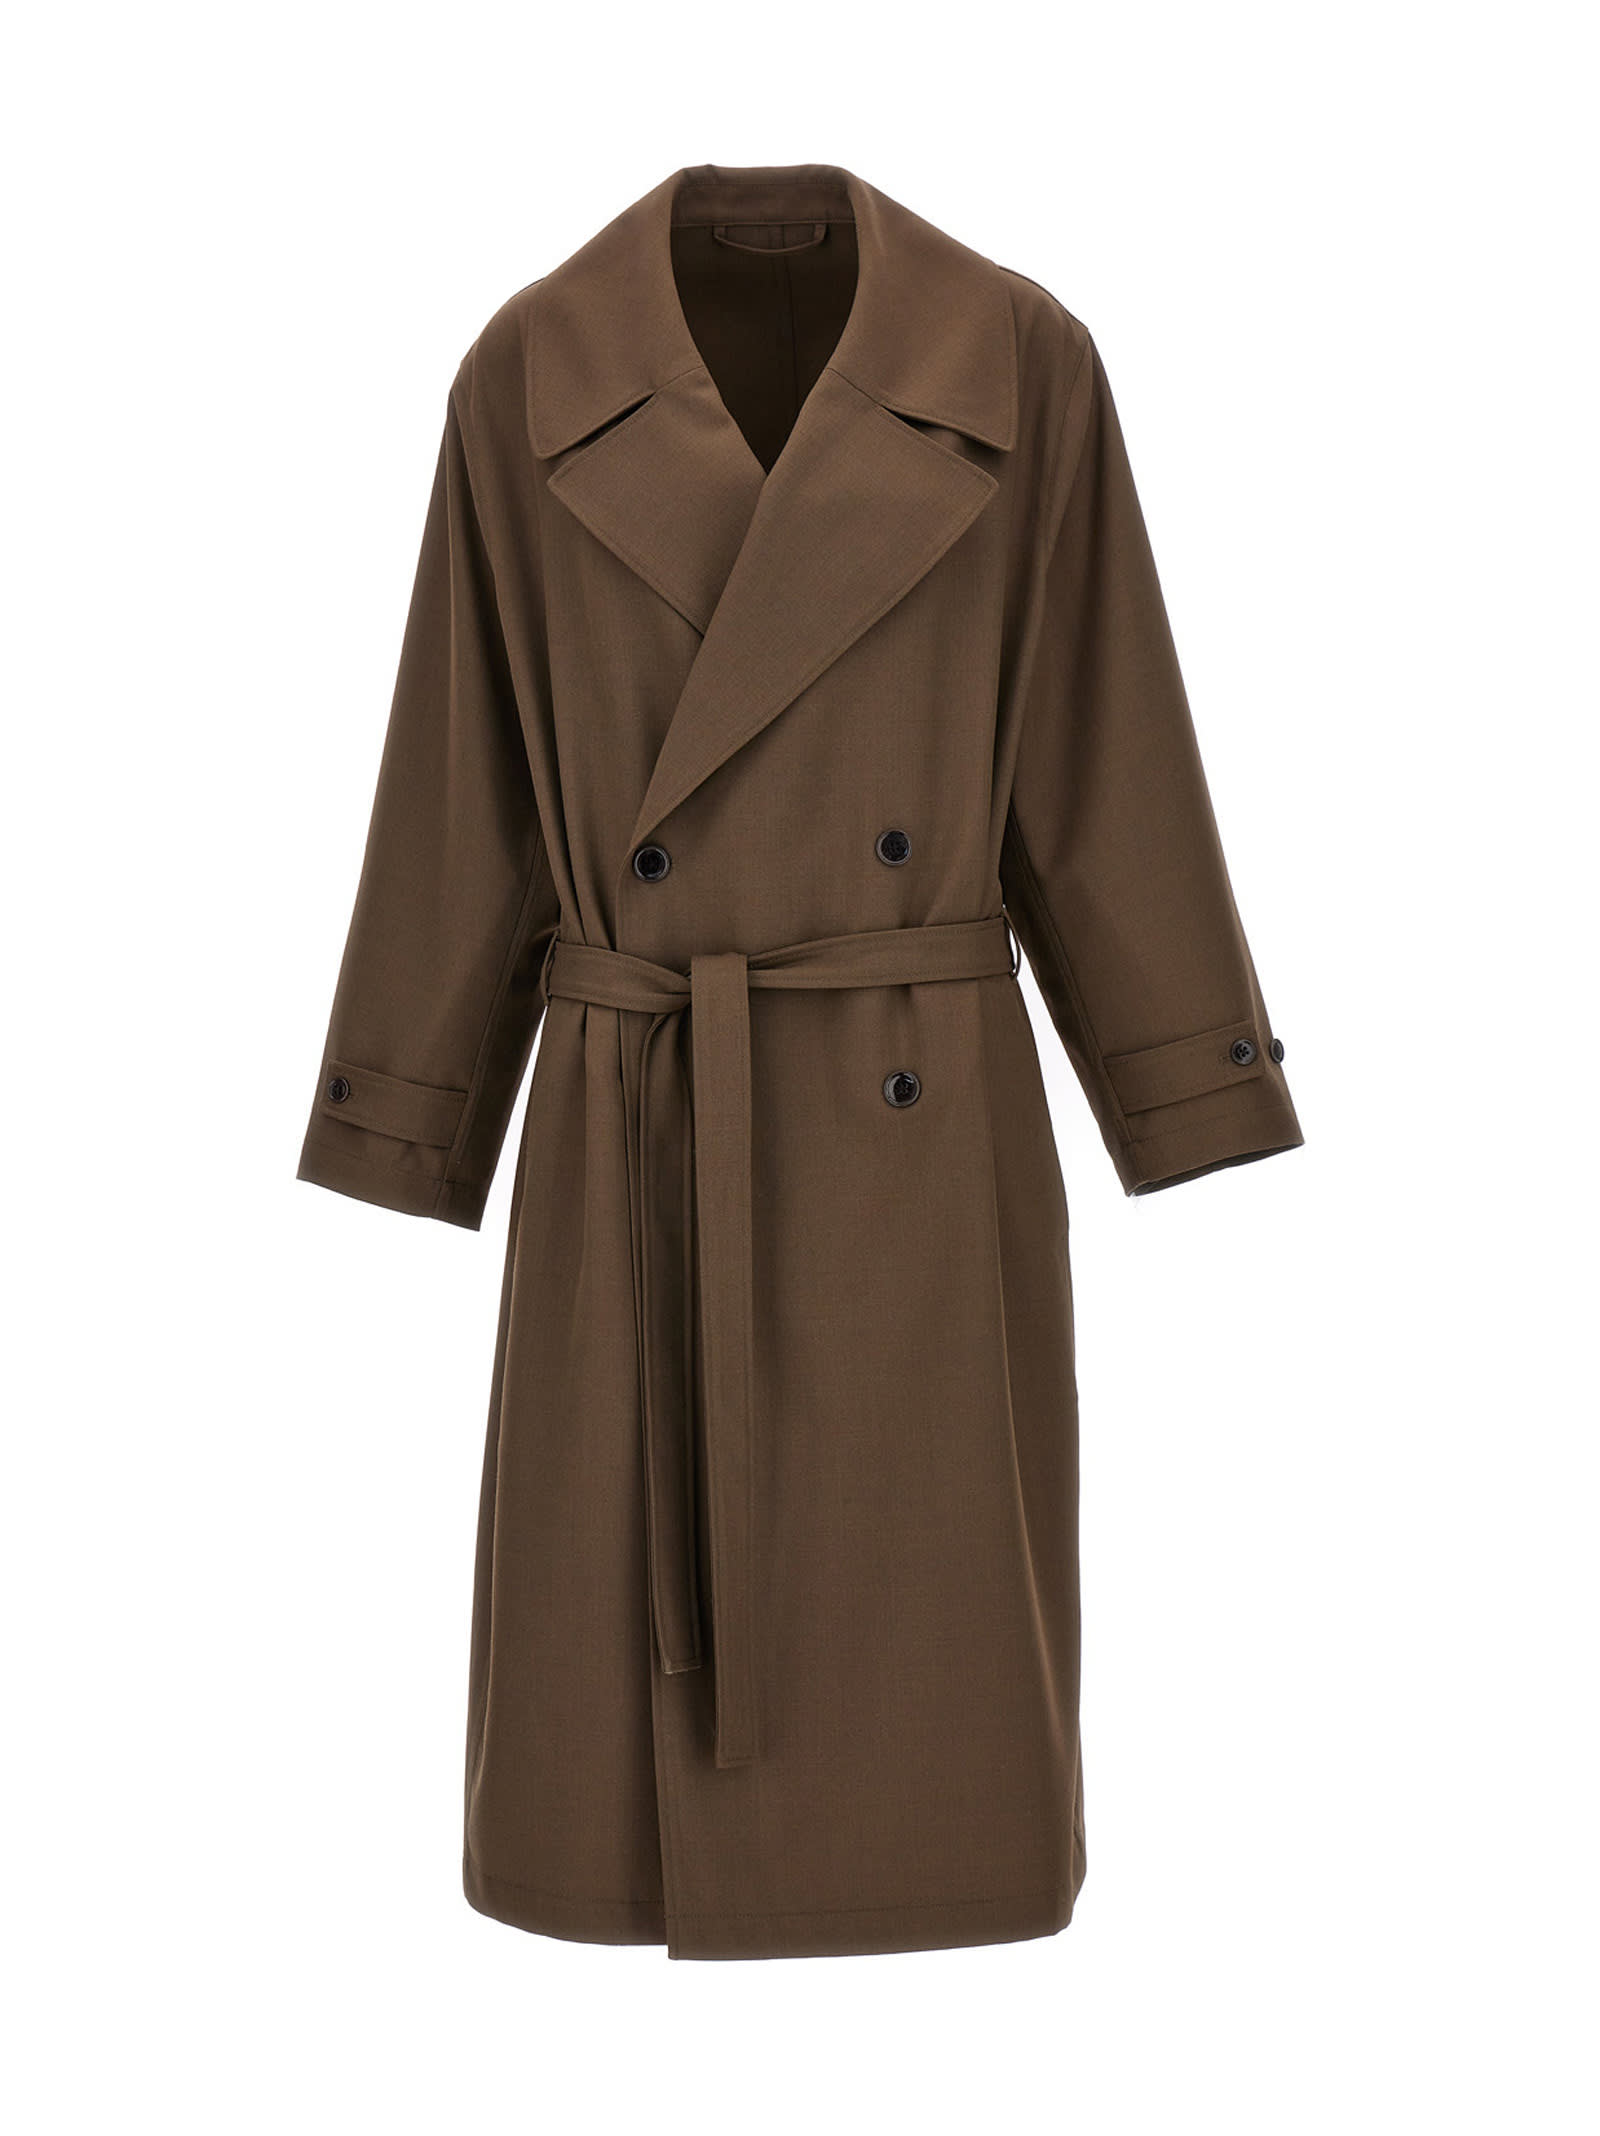 LEMAIRE DOUBLE-BREASTED TRENCH COAT